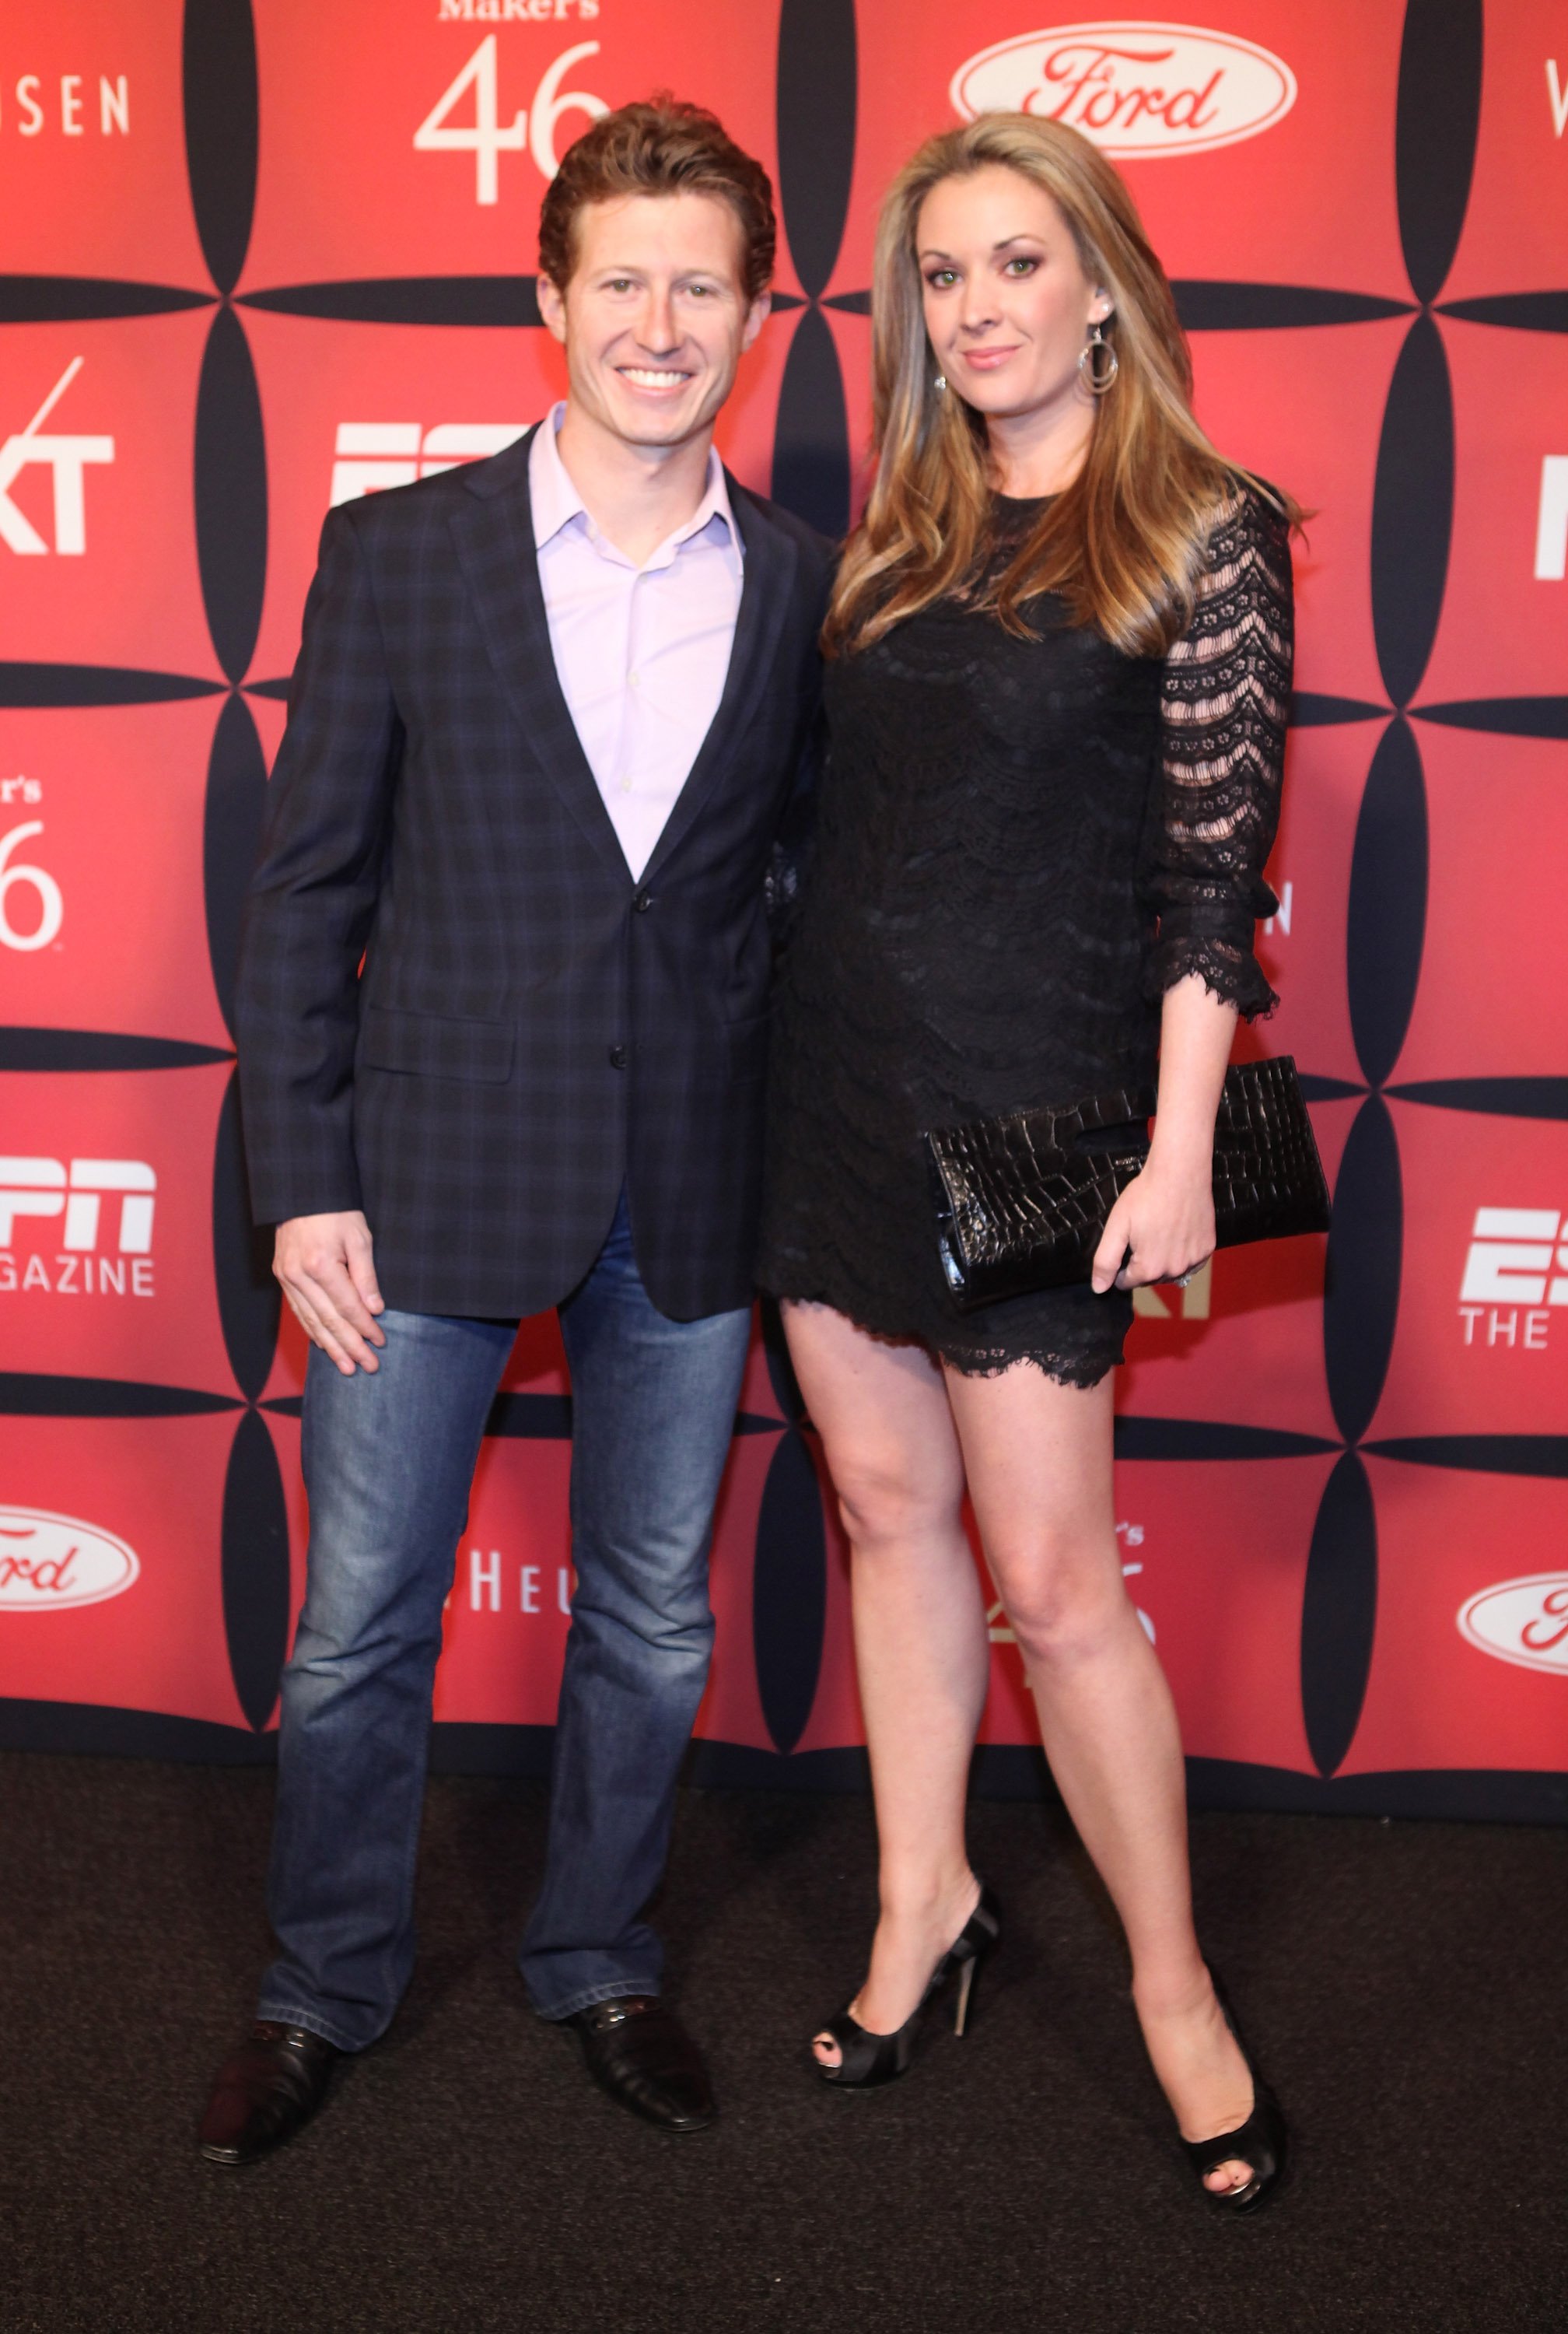 Race driver Ryan Briscoe and sportscaster Nicole Briscoe attend ESPN The Magazine's "NEXT" Event on February 3, 2012 in Indianapolis, Indiana | Photo: Getty Images